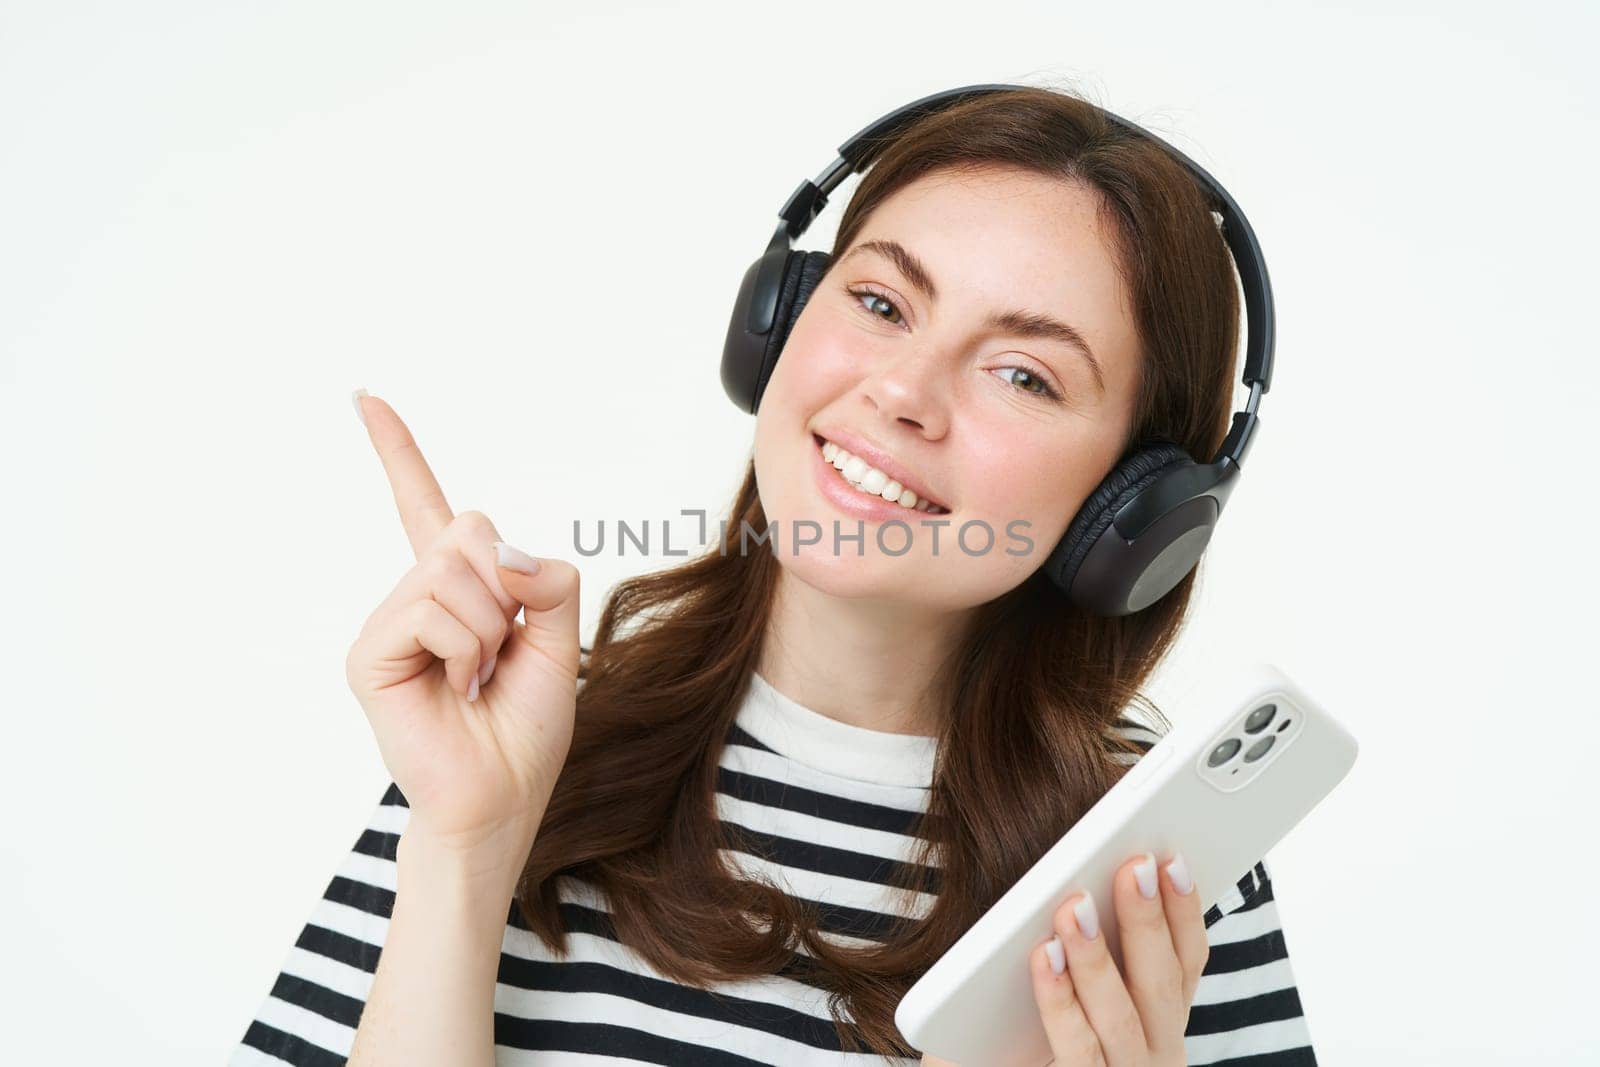 Portrait of smiling student, girl in headphones, holding mobile phone, pointing left, showing advertisement, store offer, white background.